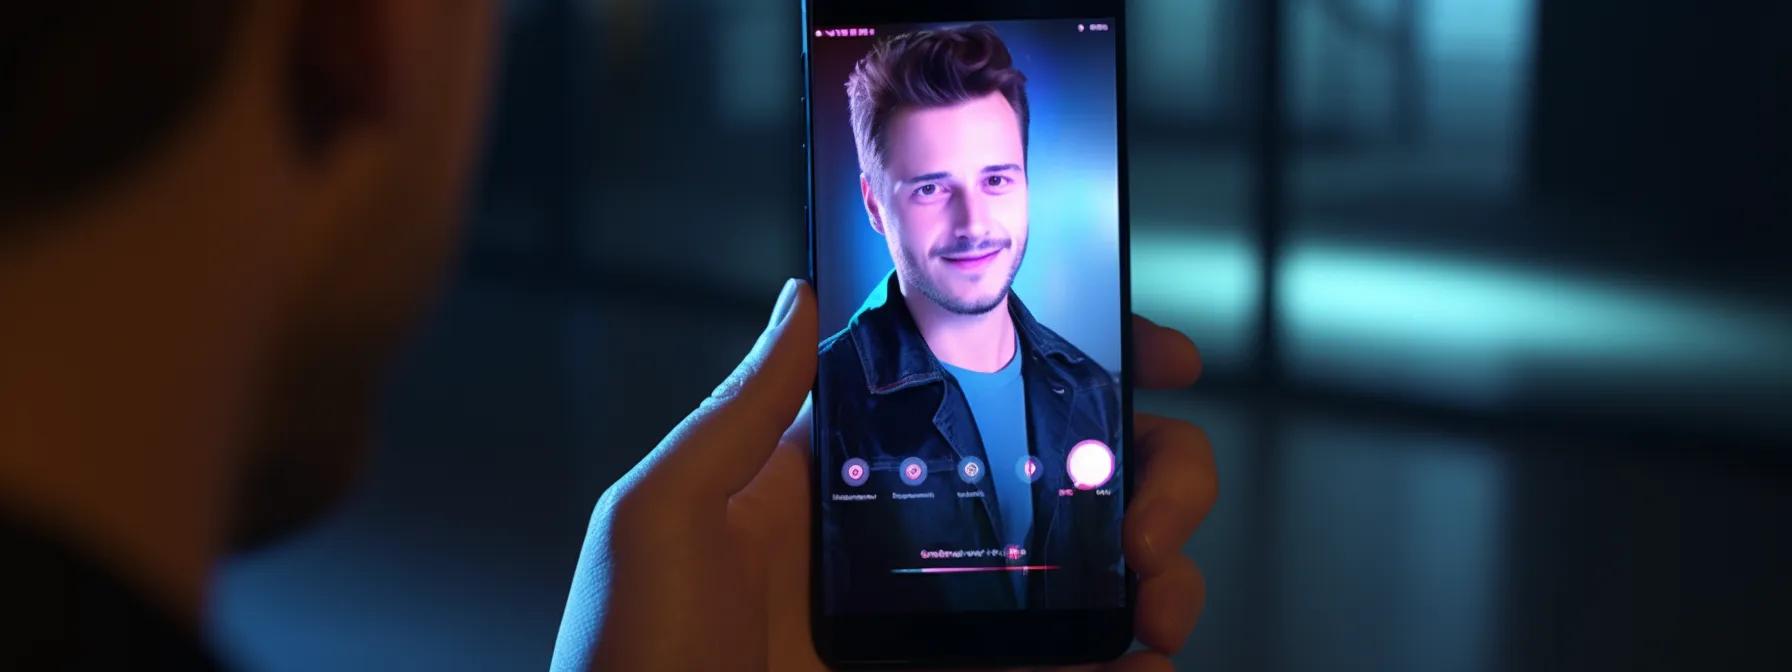 a person speaking into a smartphone, with voice search technology being emphasized.